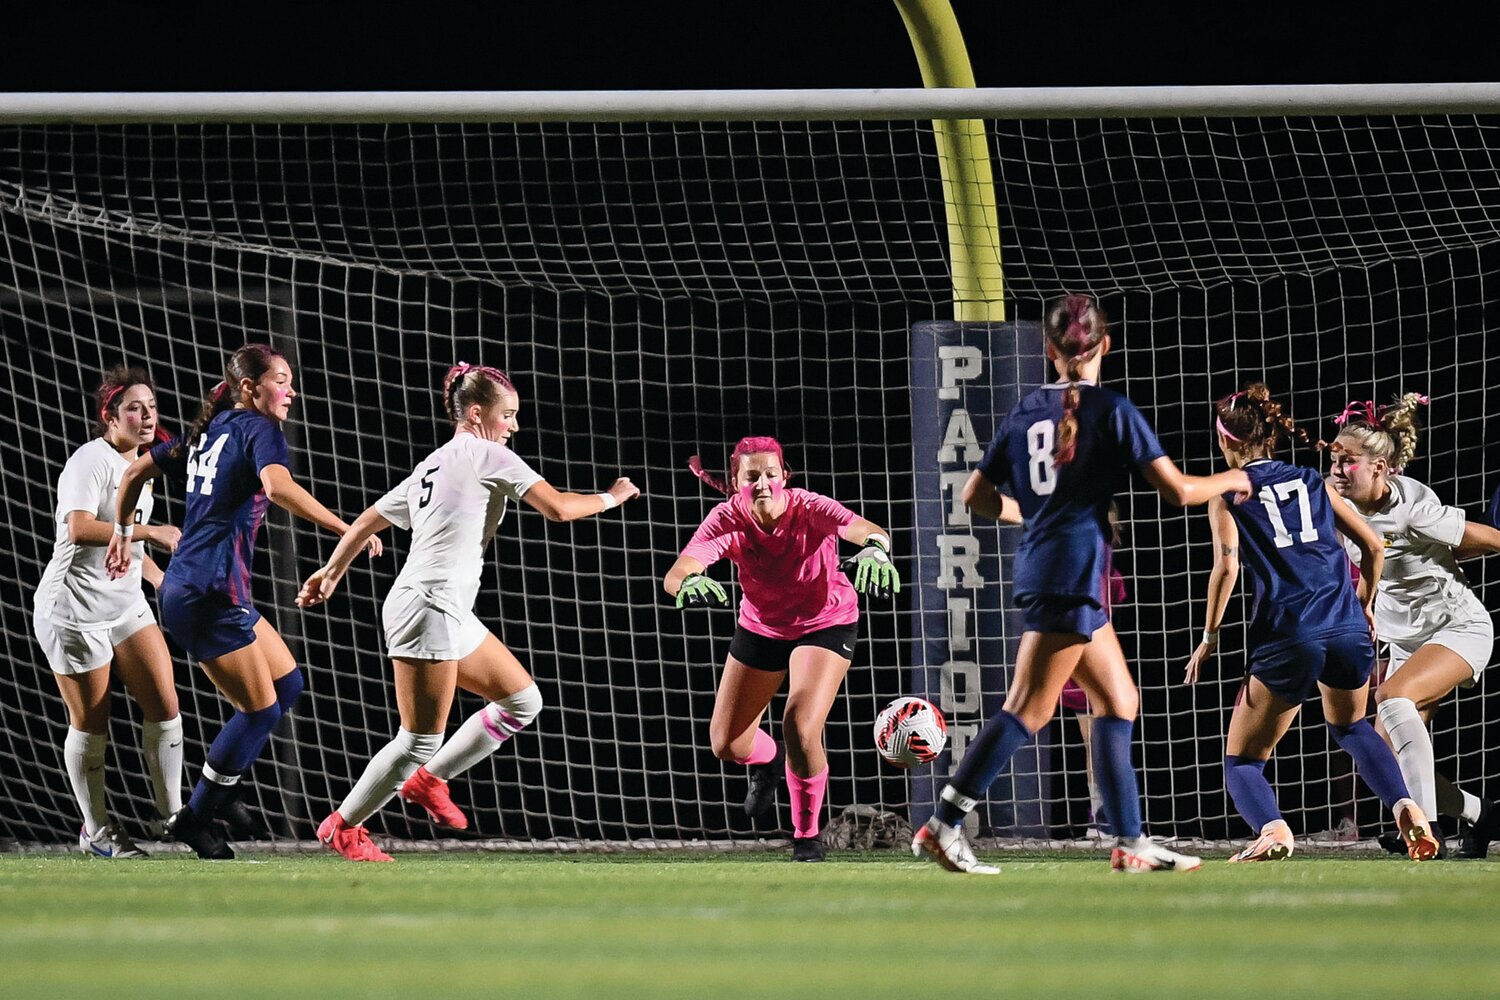 CB East goalie Mae Leedy scrambles to make a save in the second half.